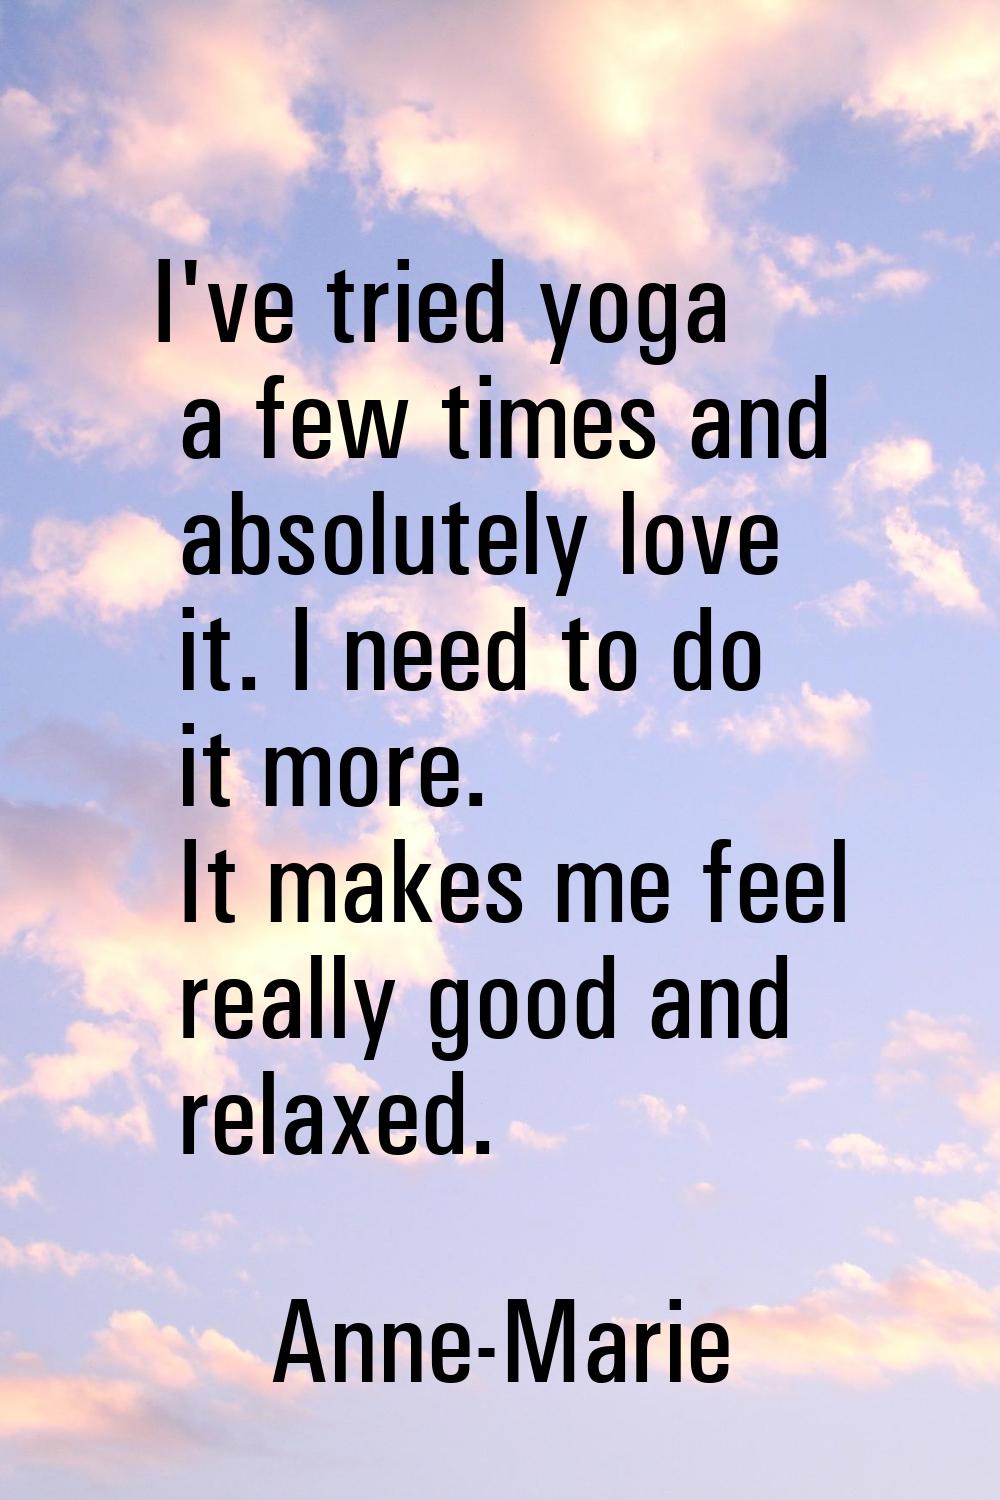 I've tried yoga a few times and absolutely love it. I need to do it more. It makes me feel really g